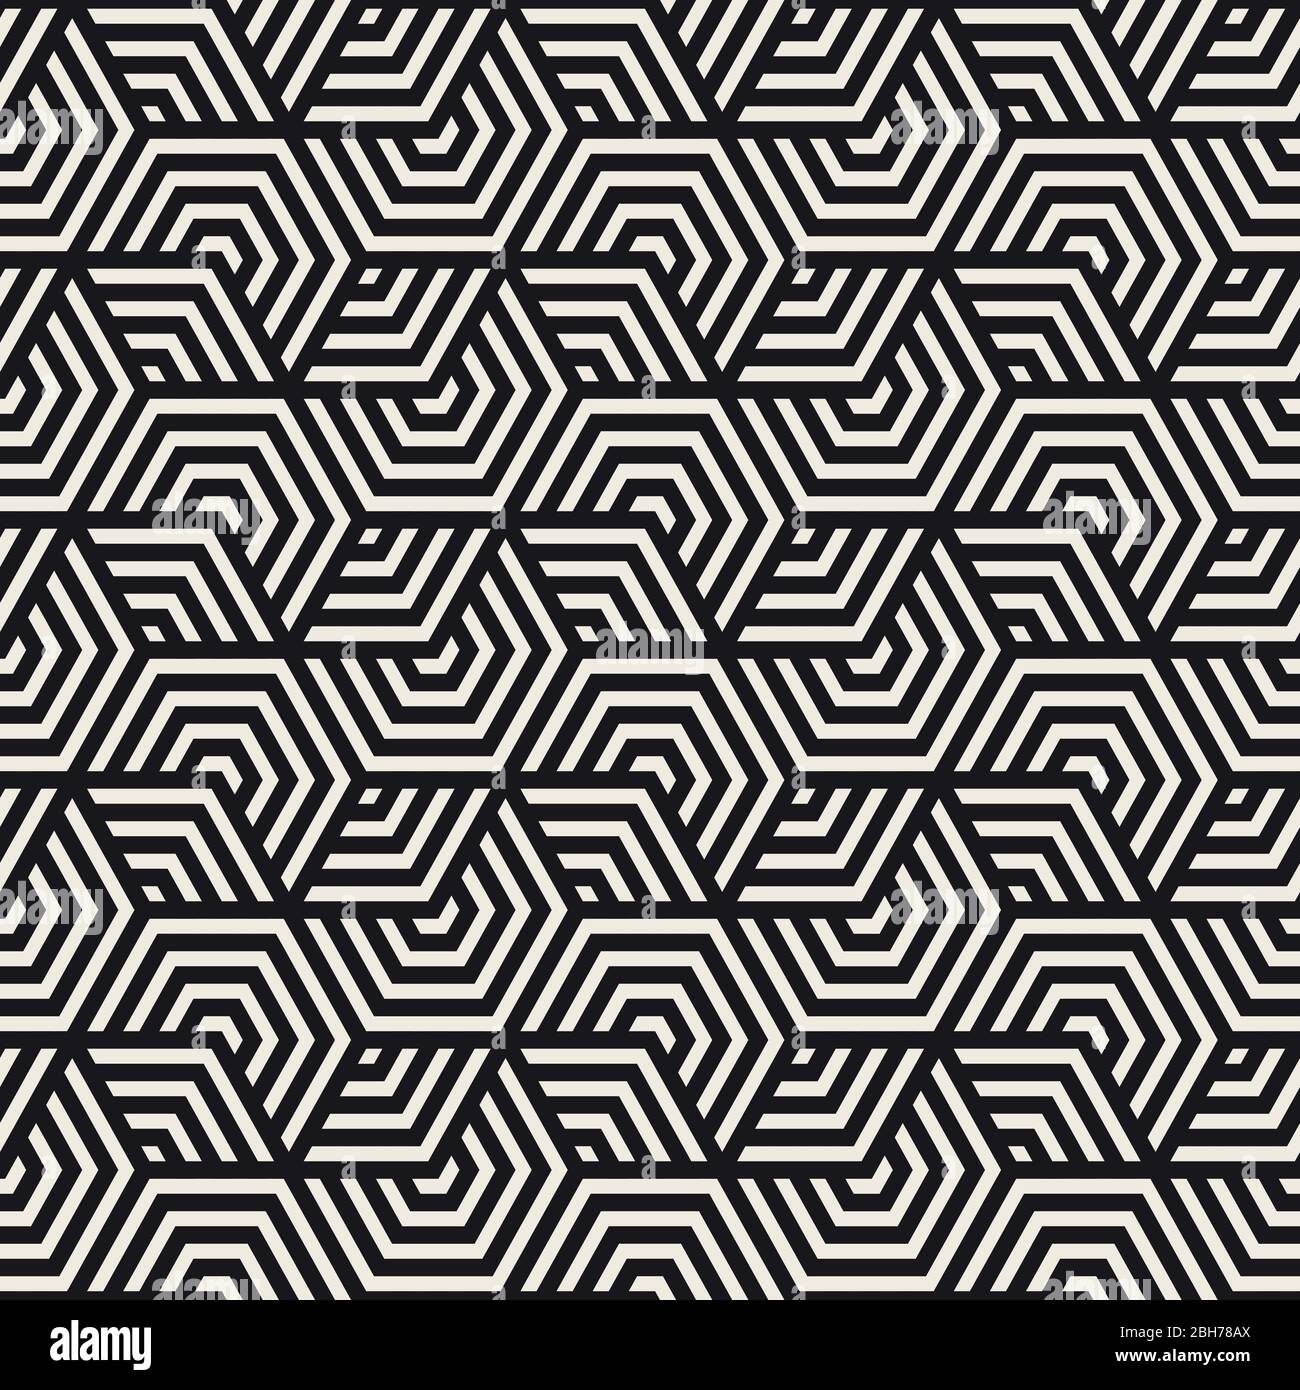 https://c8.alamy.com/comp/2BH78AX/vector-seamless-pattern-modern-stylish-texture-repeating-geometric-tiles-from-thin-lines-contemporary-graphic-design-2BH78AX.jpg